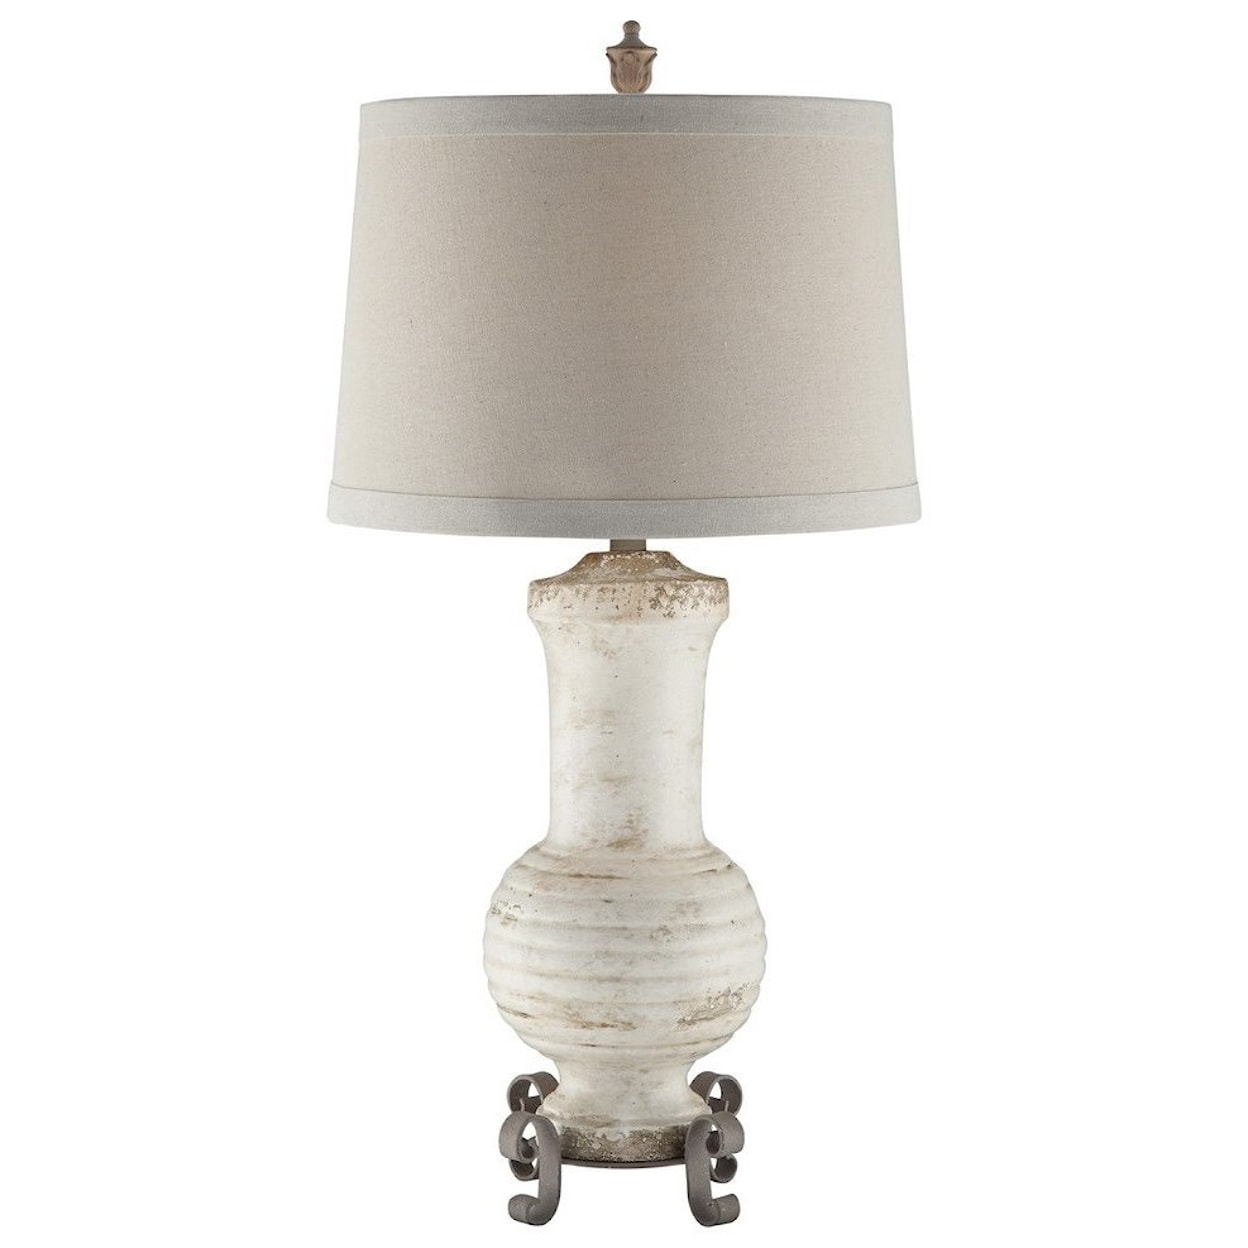 Crestview Collection Lighting Andrea Table Lamp